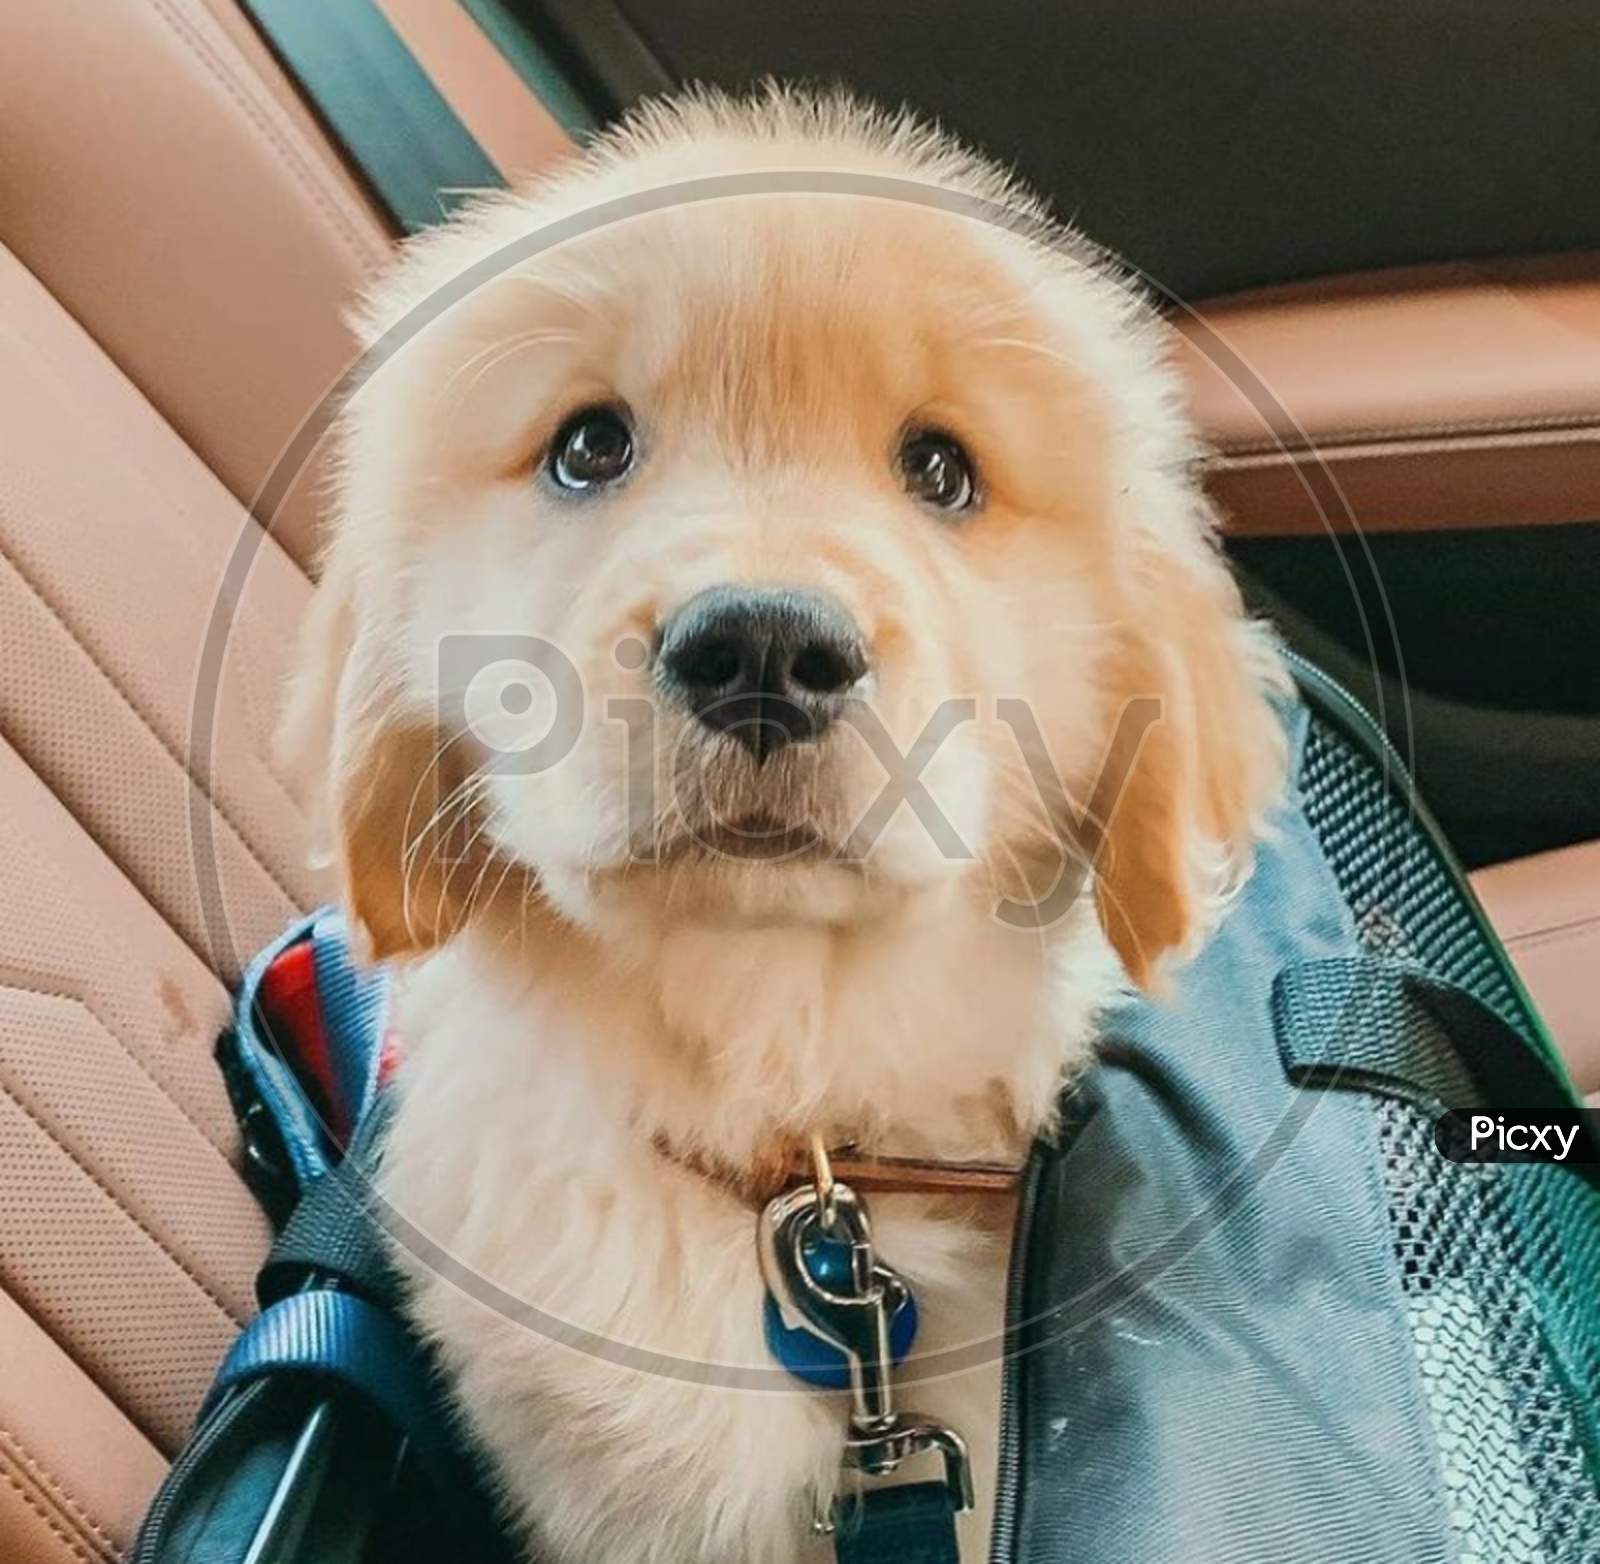 A puppy poping out from bag